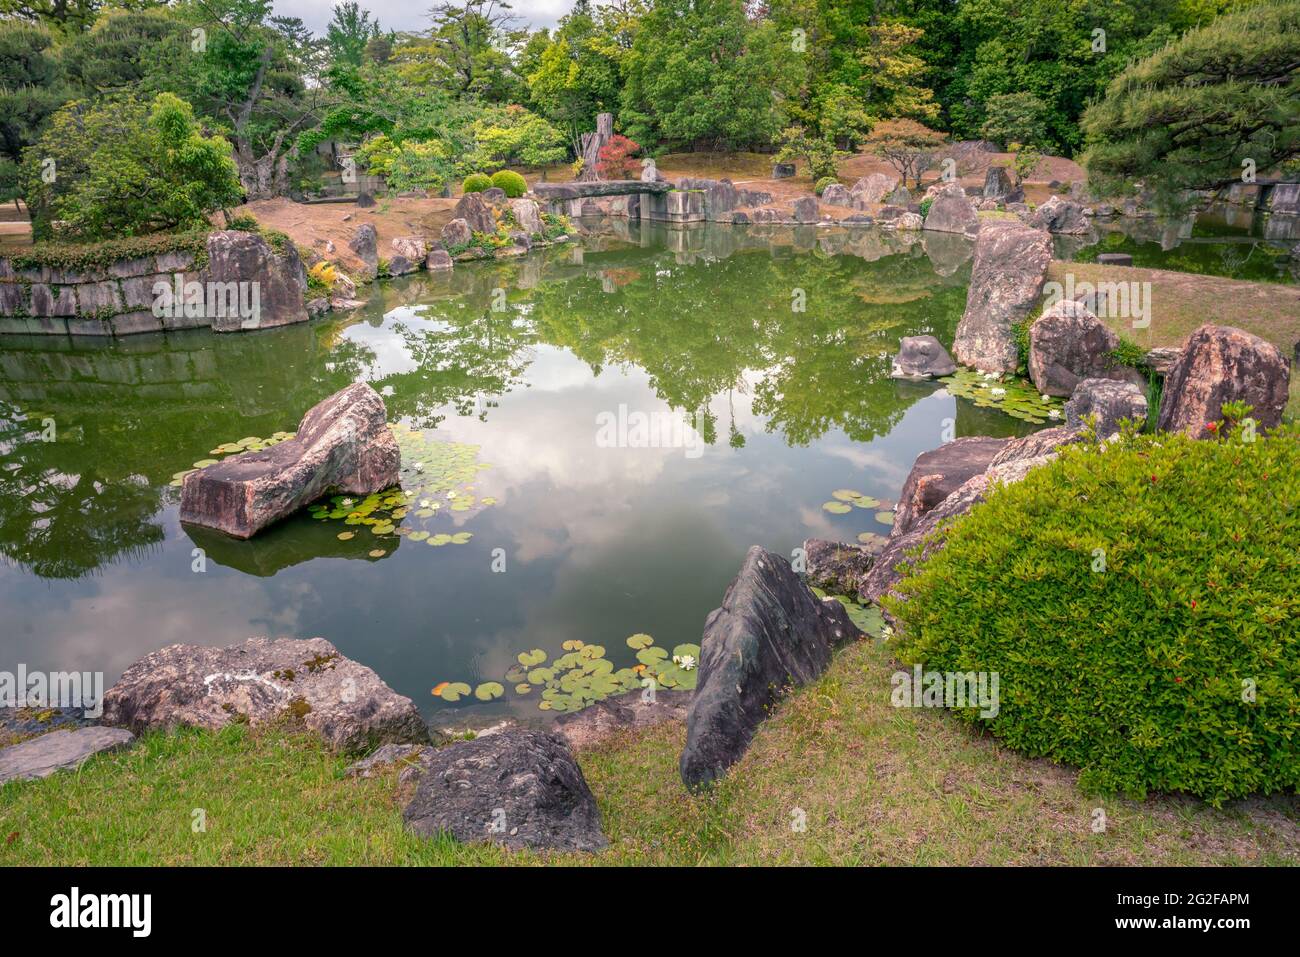 Old, traditional Japanese garden with precisely cut trees, small pond and stone bridges. Trees reflecting in water surface. Tranquil scene in the park Stock Photo